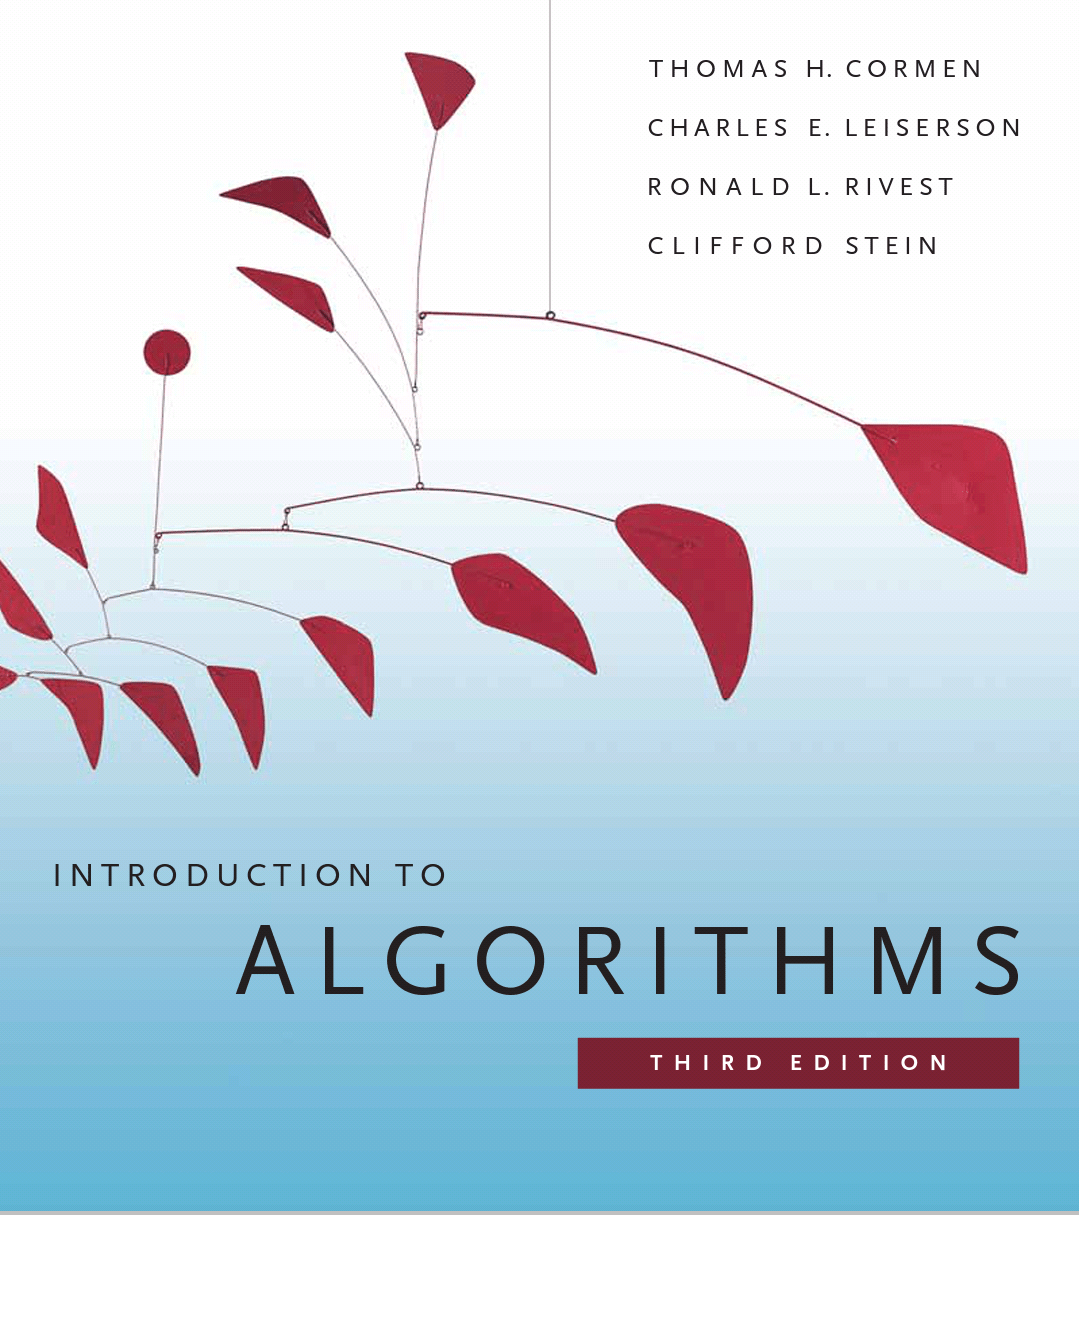 Book Cover of Introduction to Algorithms